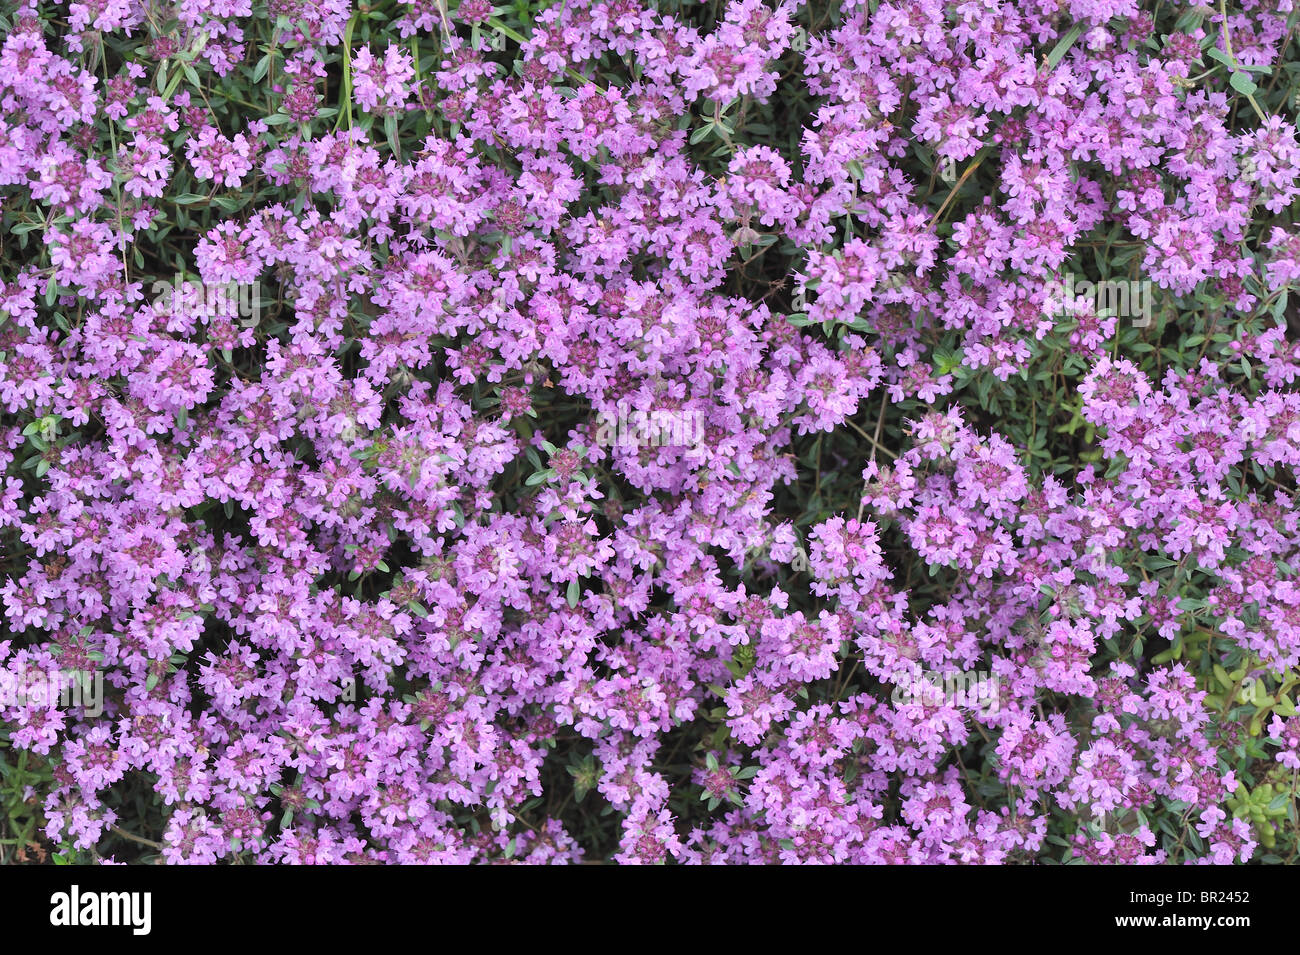 Creeping Thyme - Wild Thyme (Thymus serpyllum) flowering at spring - Cevennes - France Stock Photo